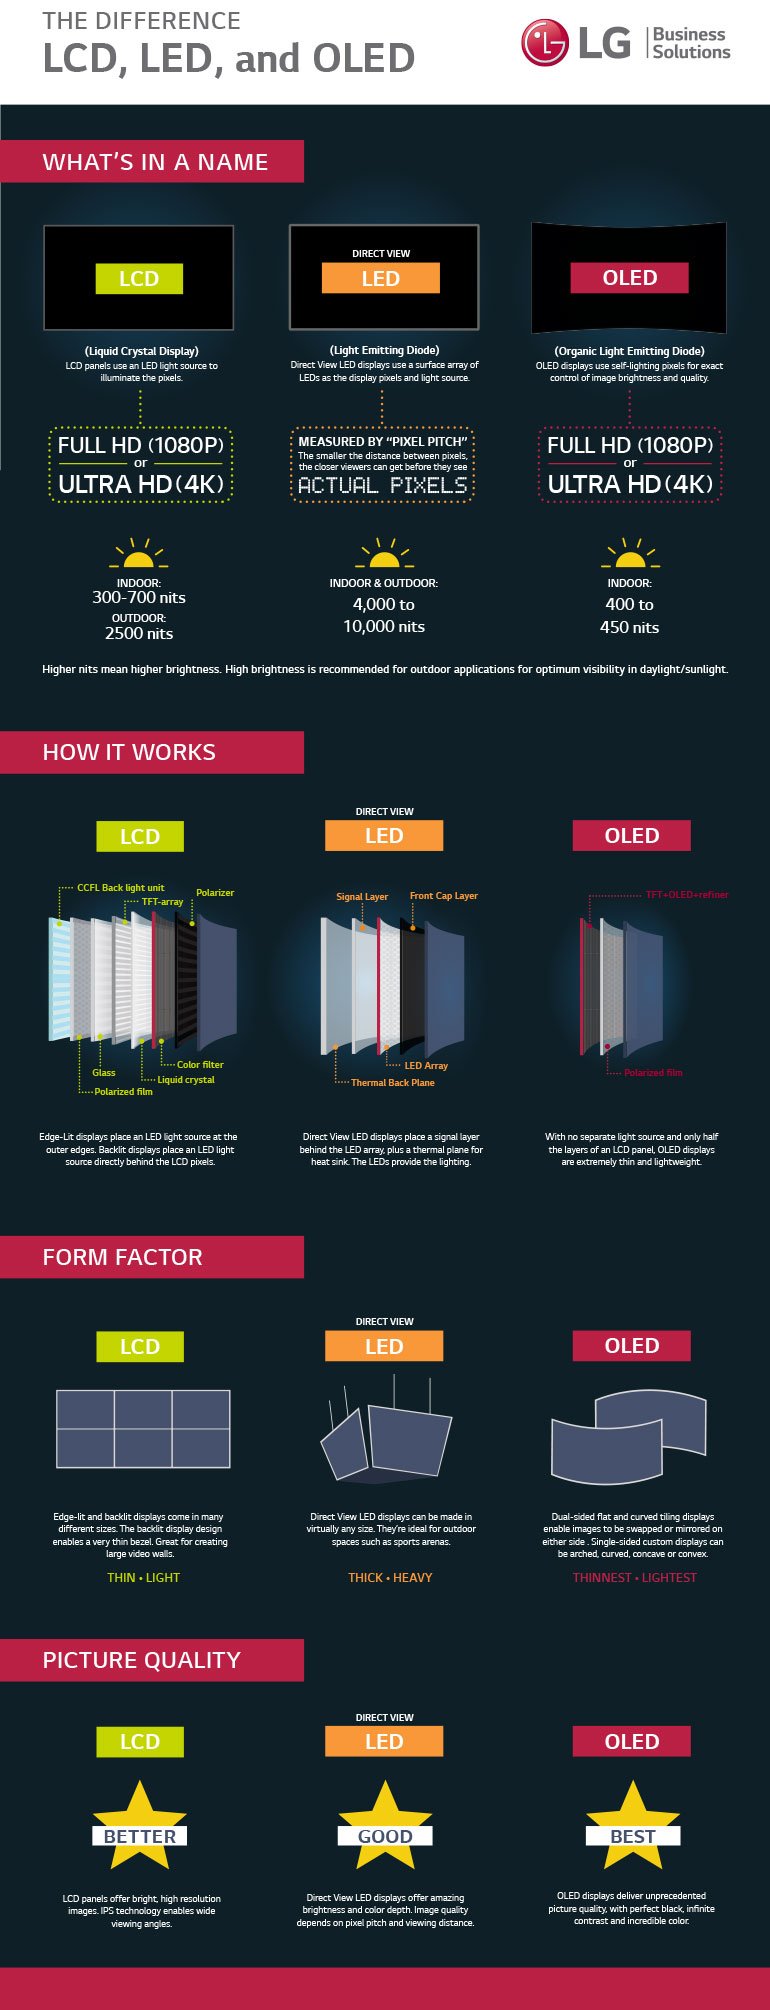 The Difference in LCD, LED and OLED infographic